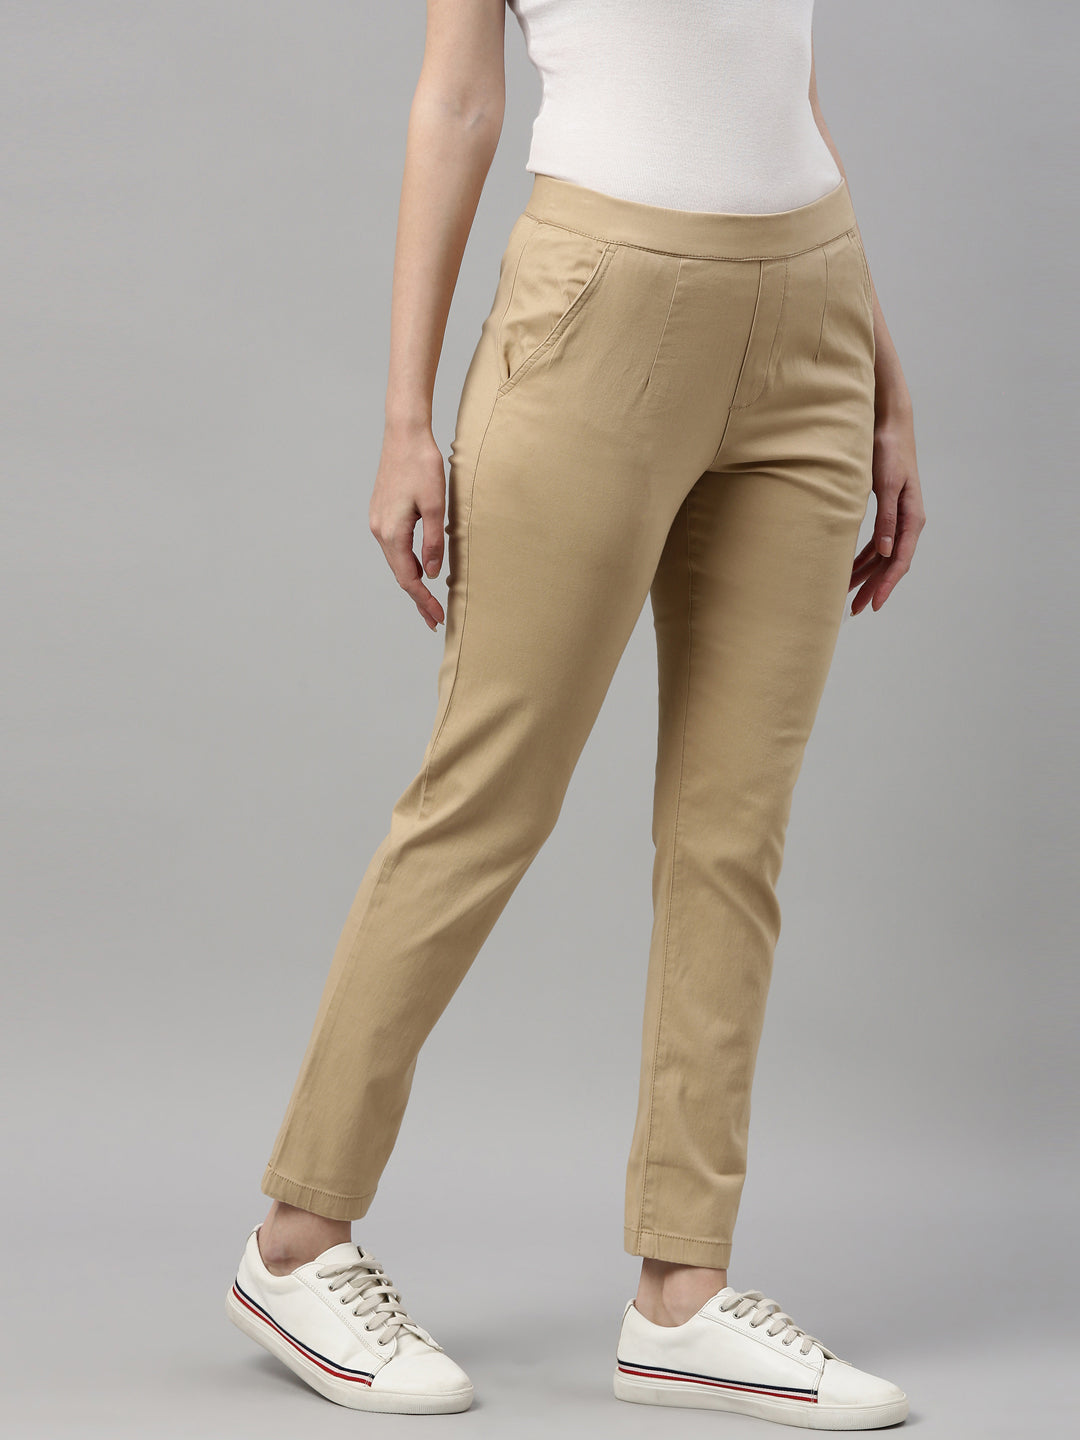 Buy Khaki Trousers  Pants for Women by Outryt Online  Ajiocom